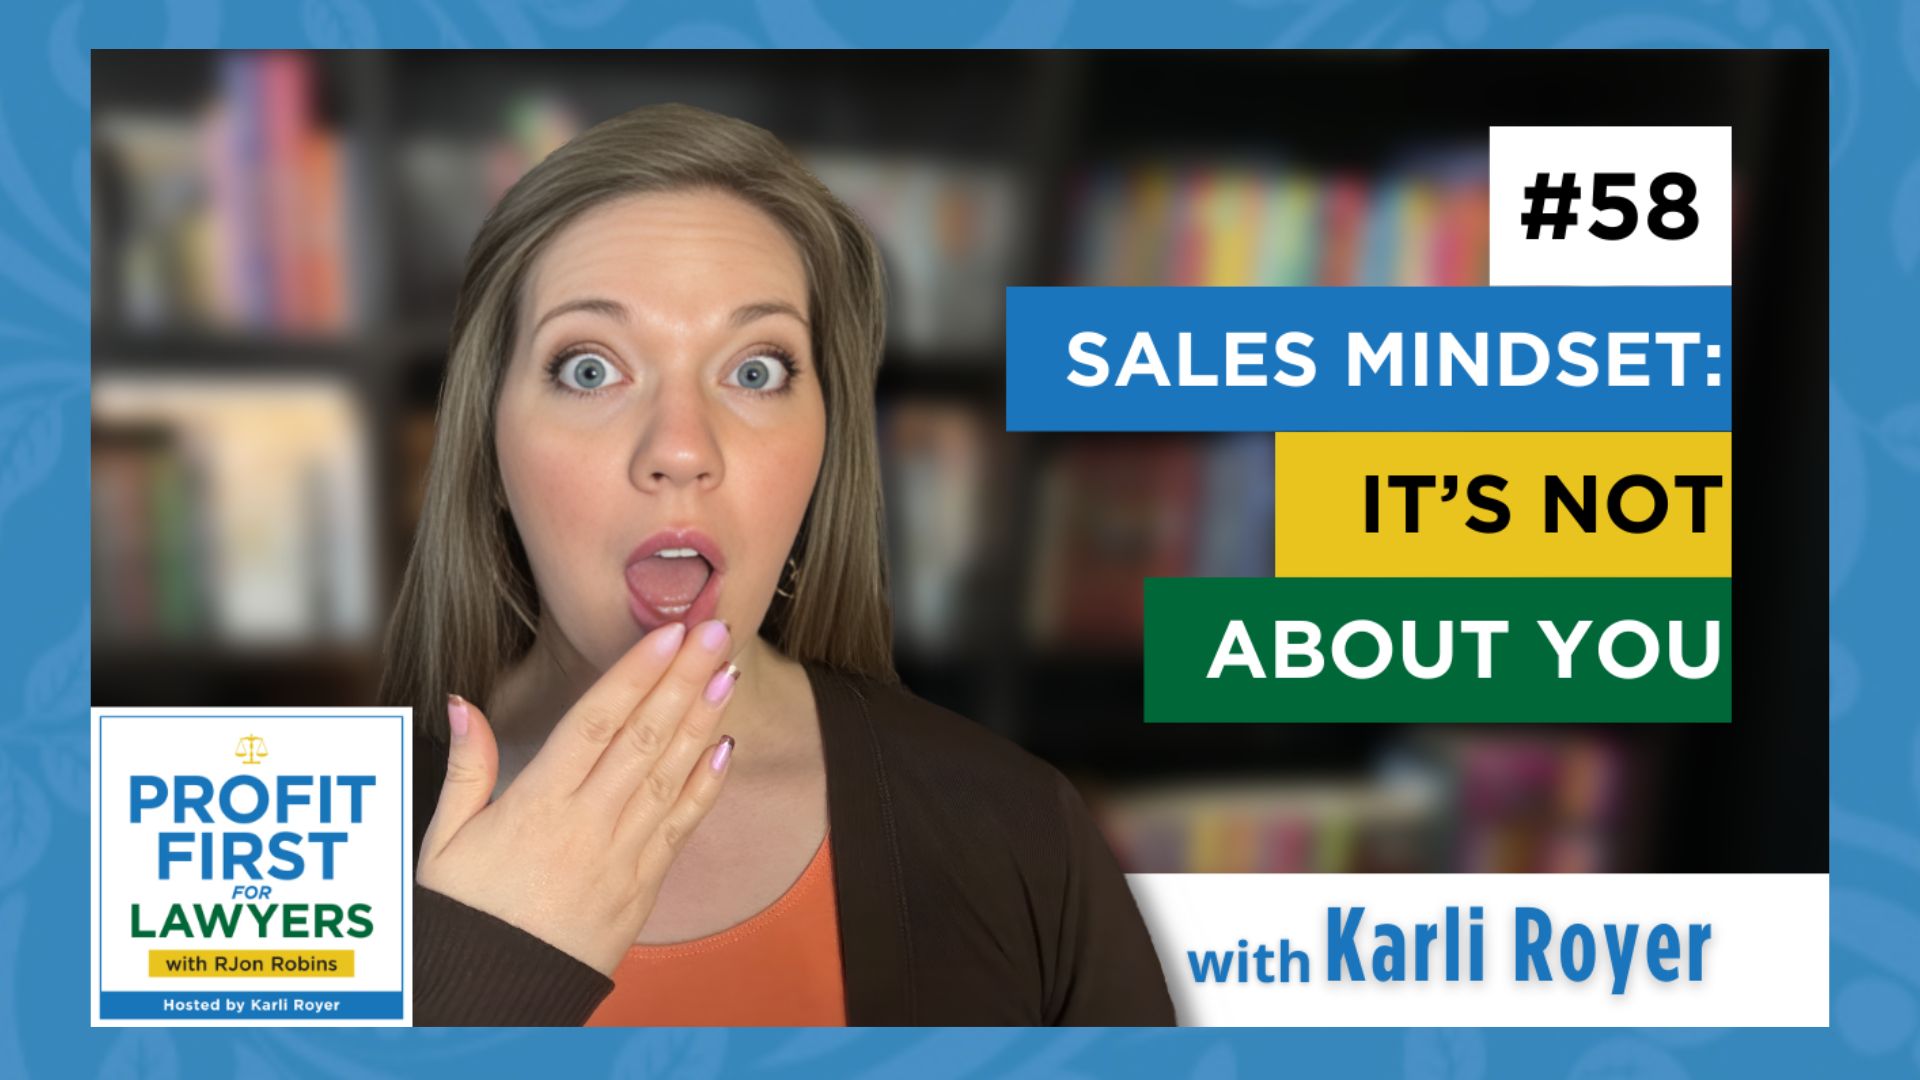 featured image of Karli Royer for episode 58 "Sales Mindset: It's Not About You" for the Profit First for Lawyers podcast.